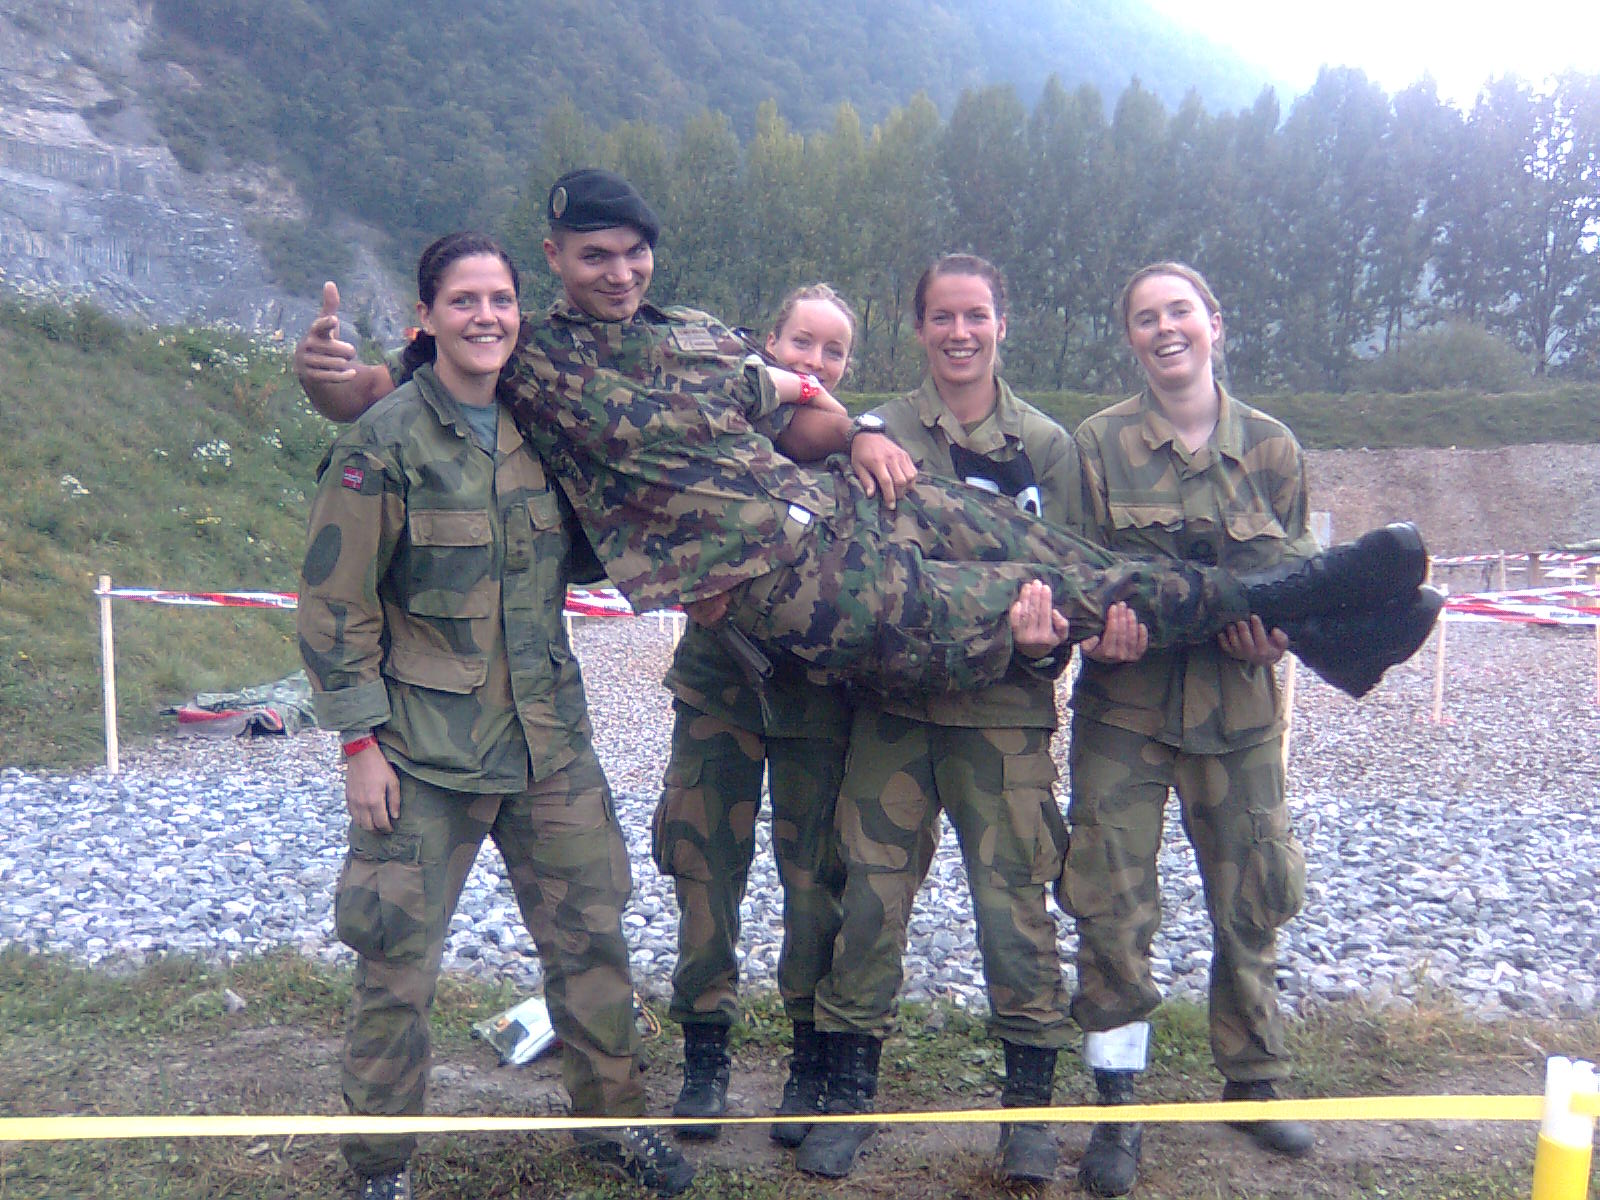 seargent sonderegger and a professional norwegian army squad at an international war game in the mountains near lake geneva